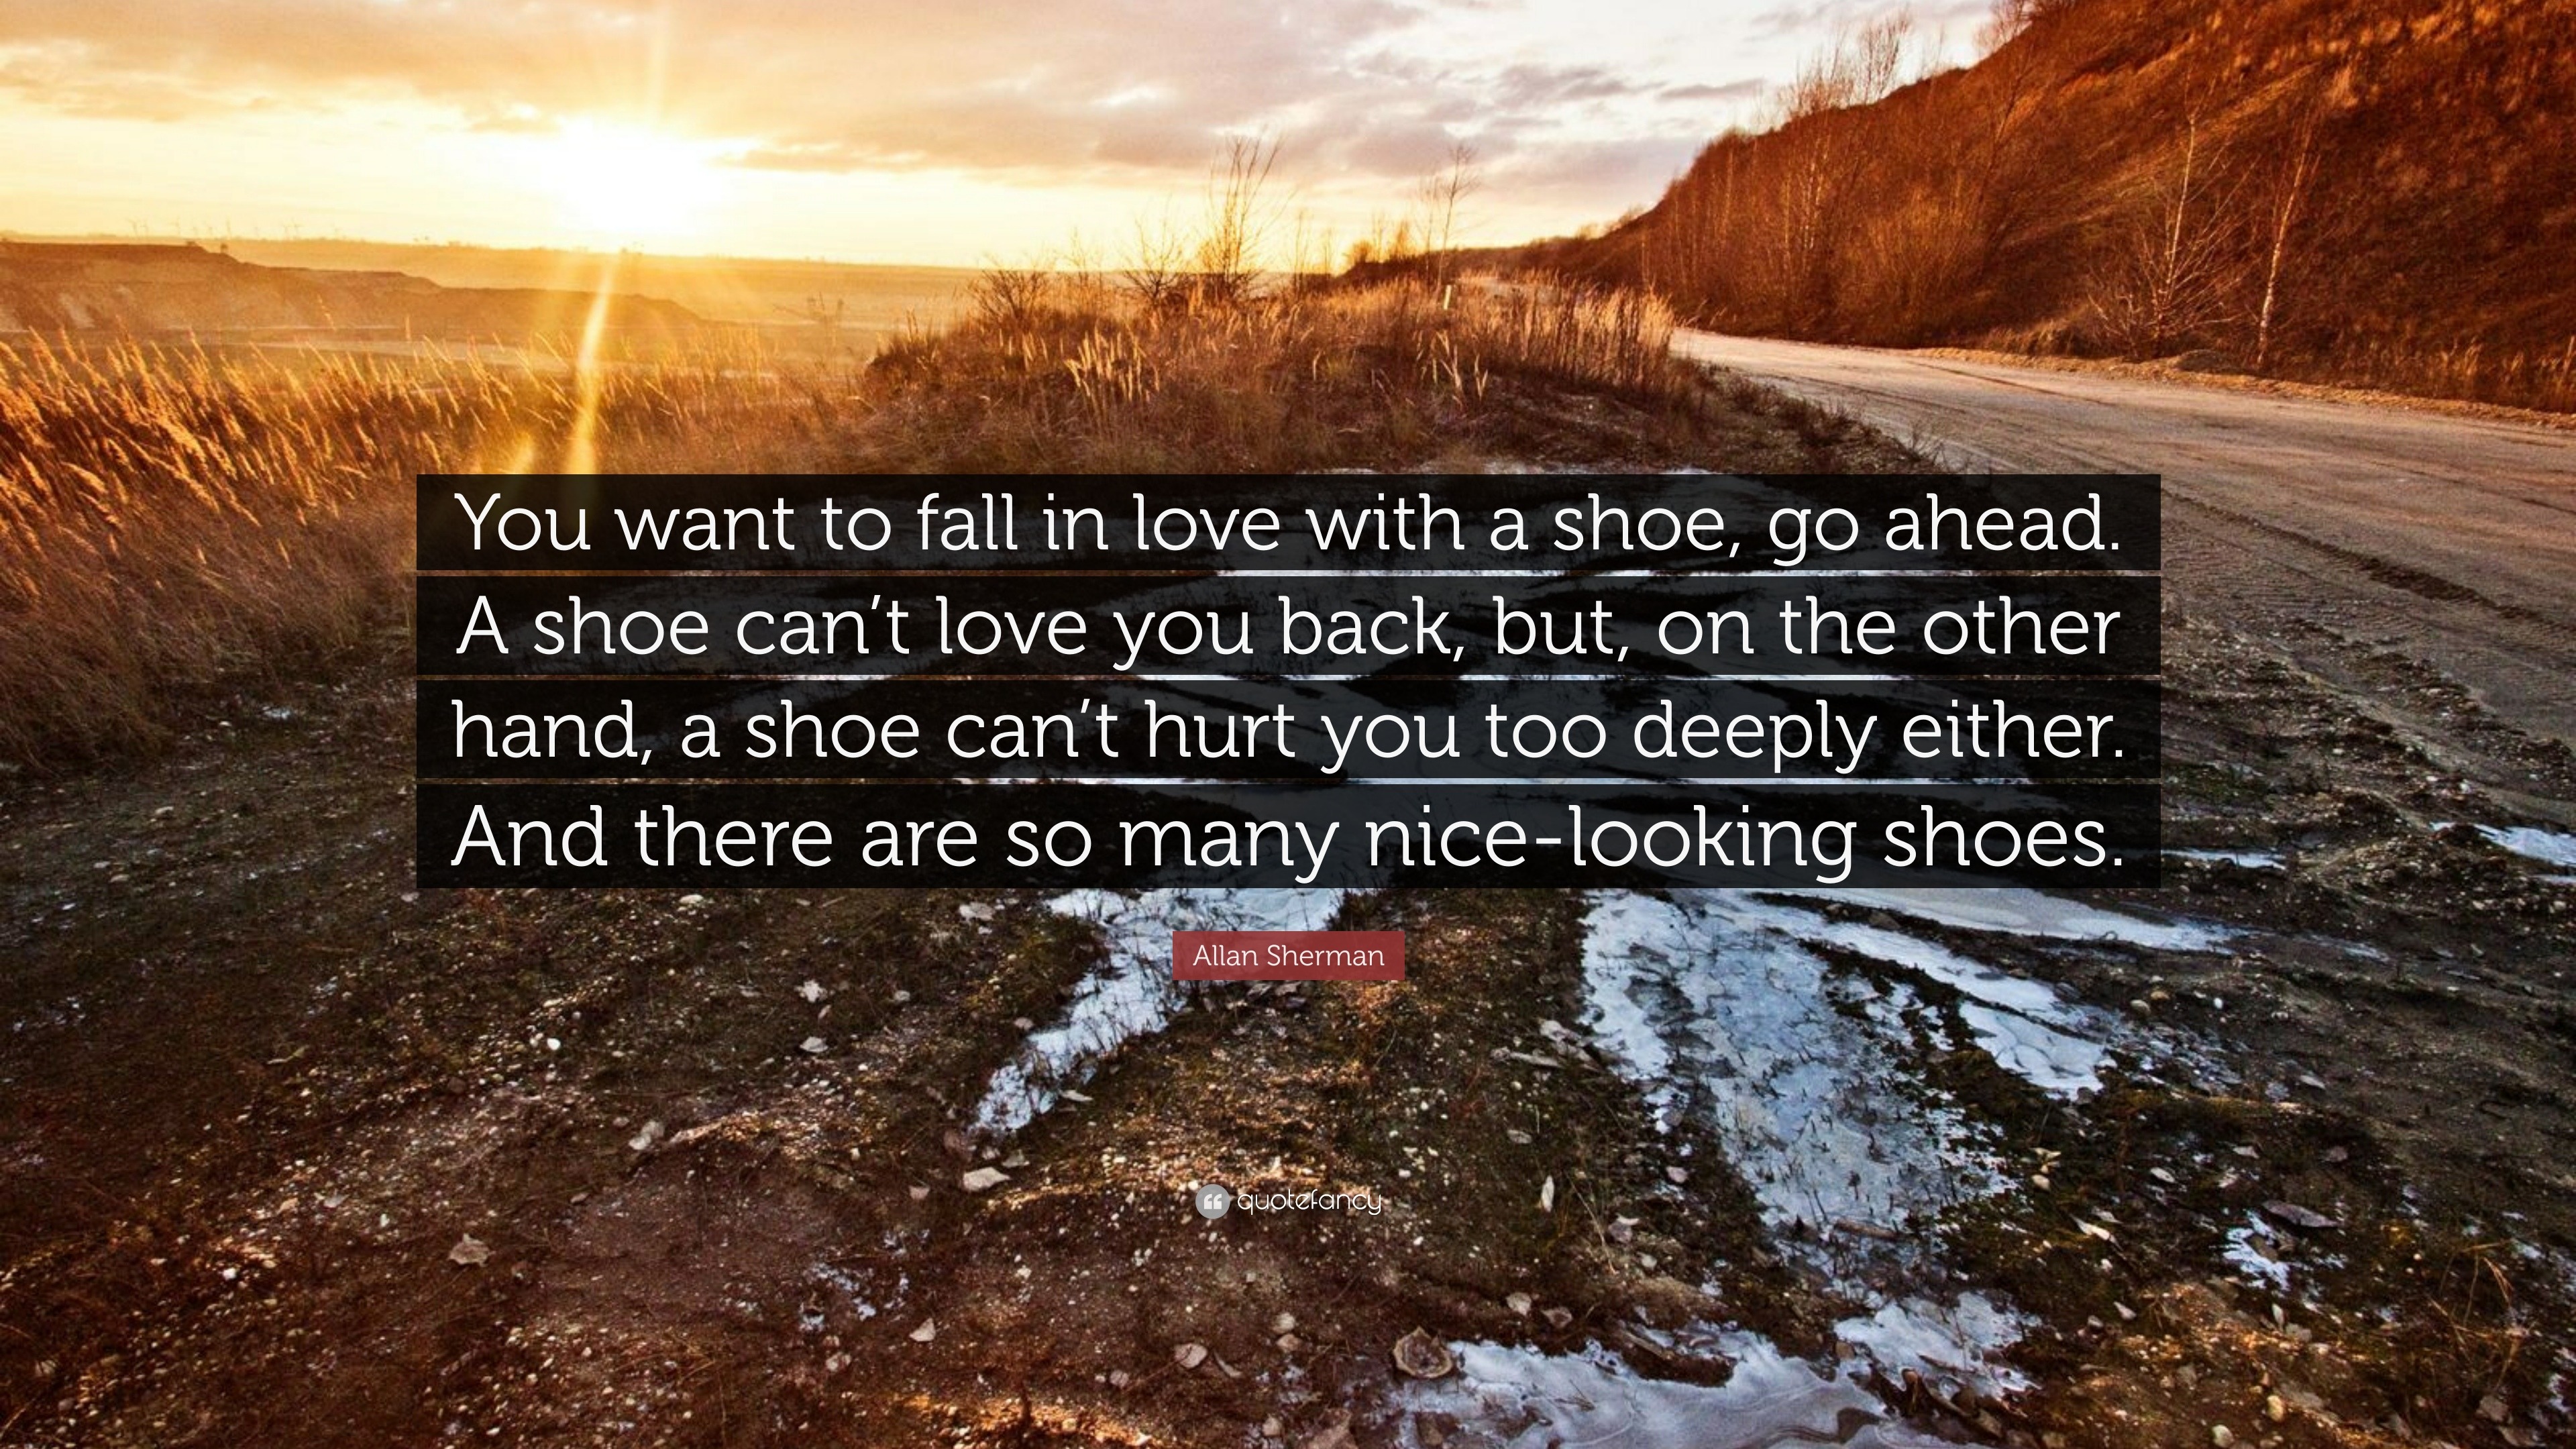 Allan Sherman Quote “You want to fall in love with a shoe go